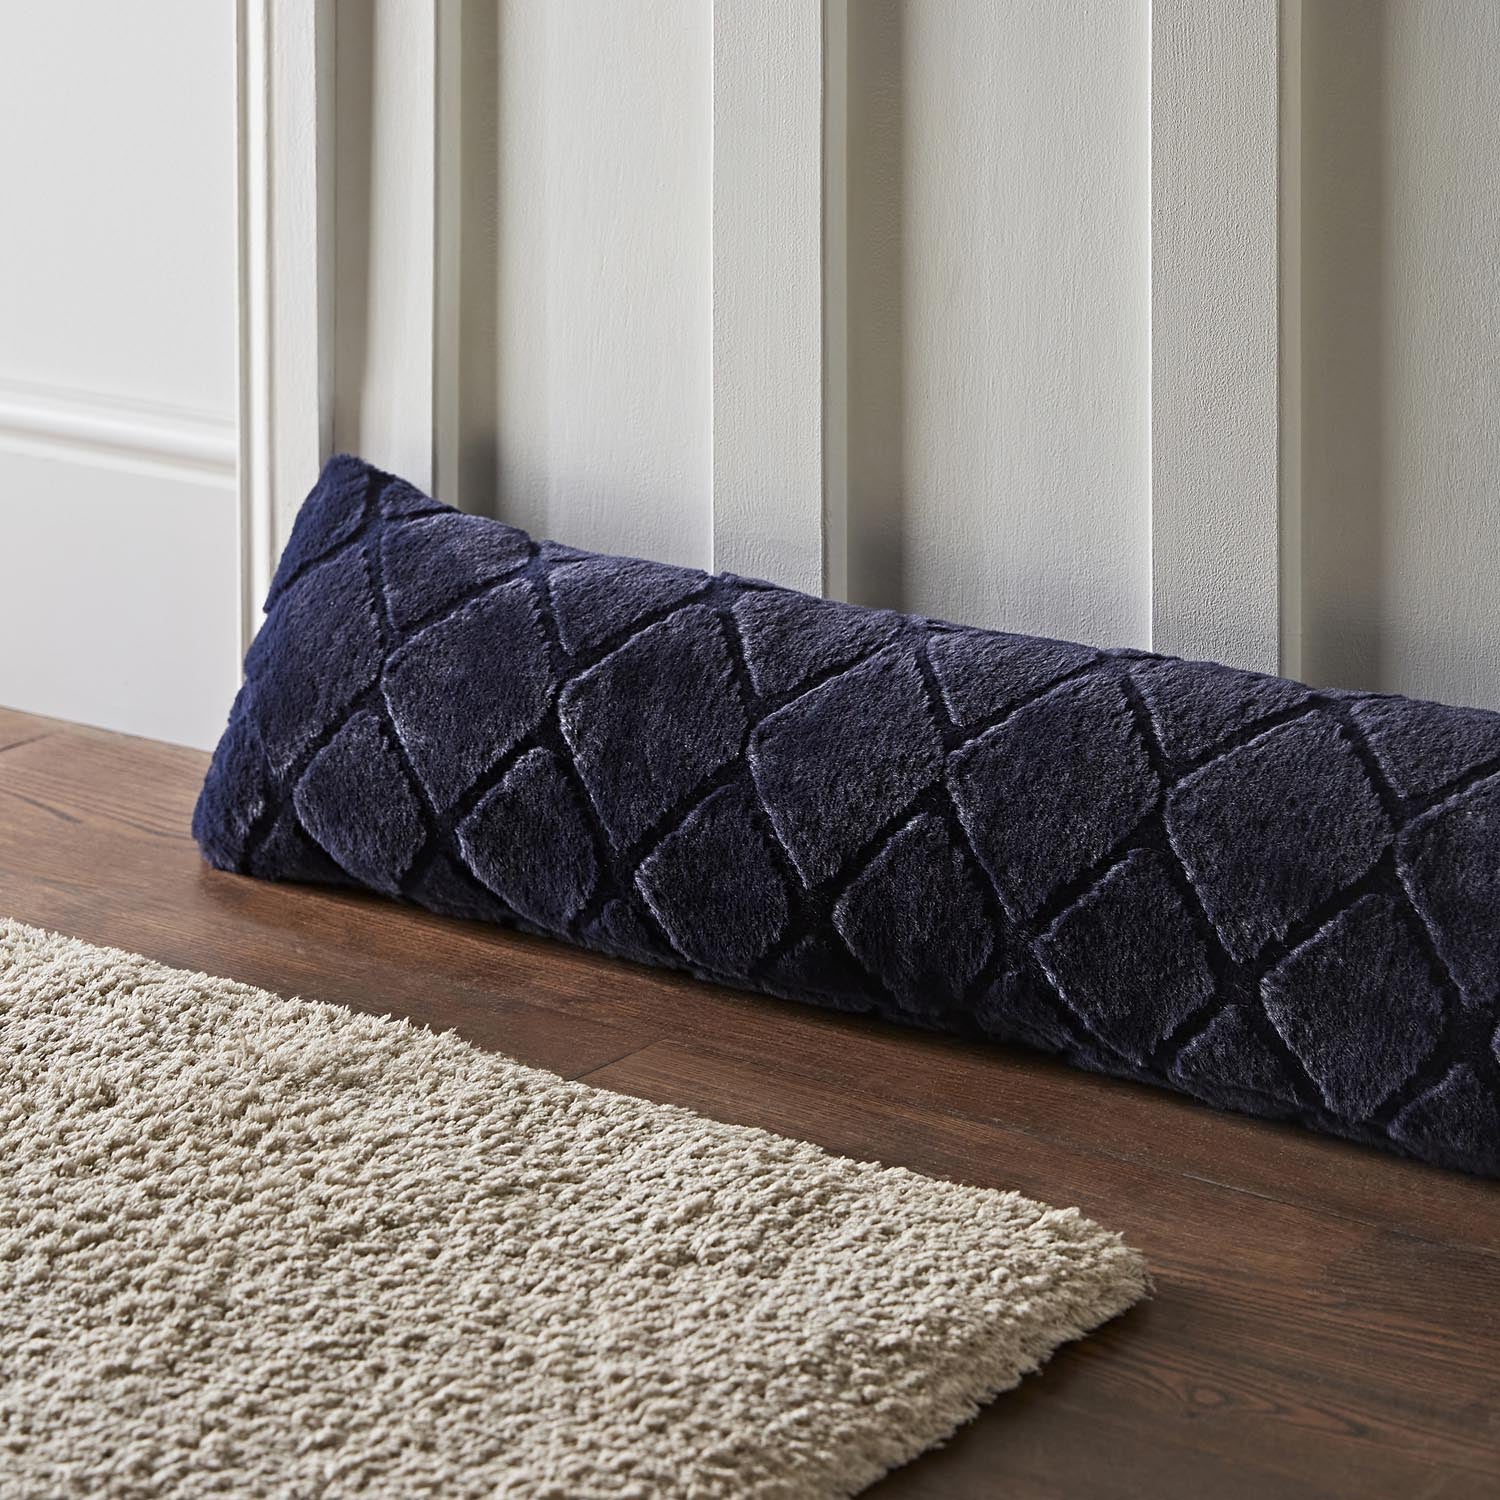 Catherine Lansfield Draught Excluder 90cm x 20cm - Navy / Blue 1 Shaws Department Stores